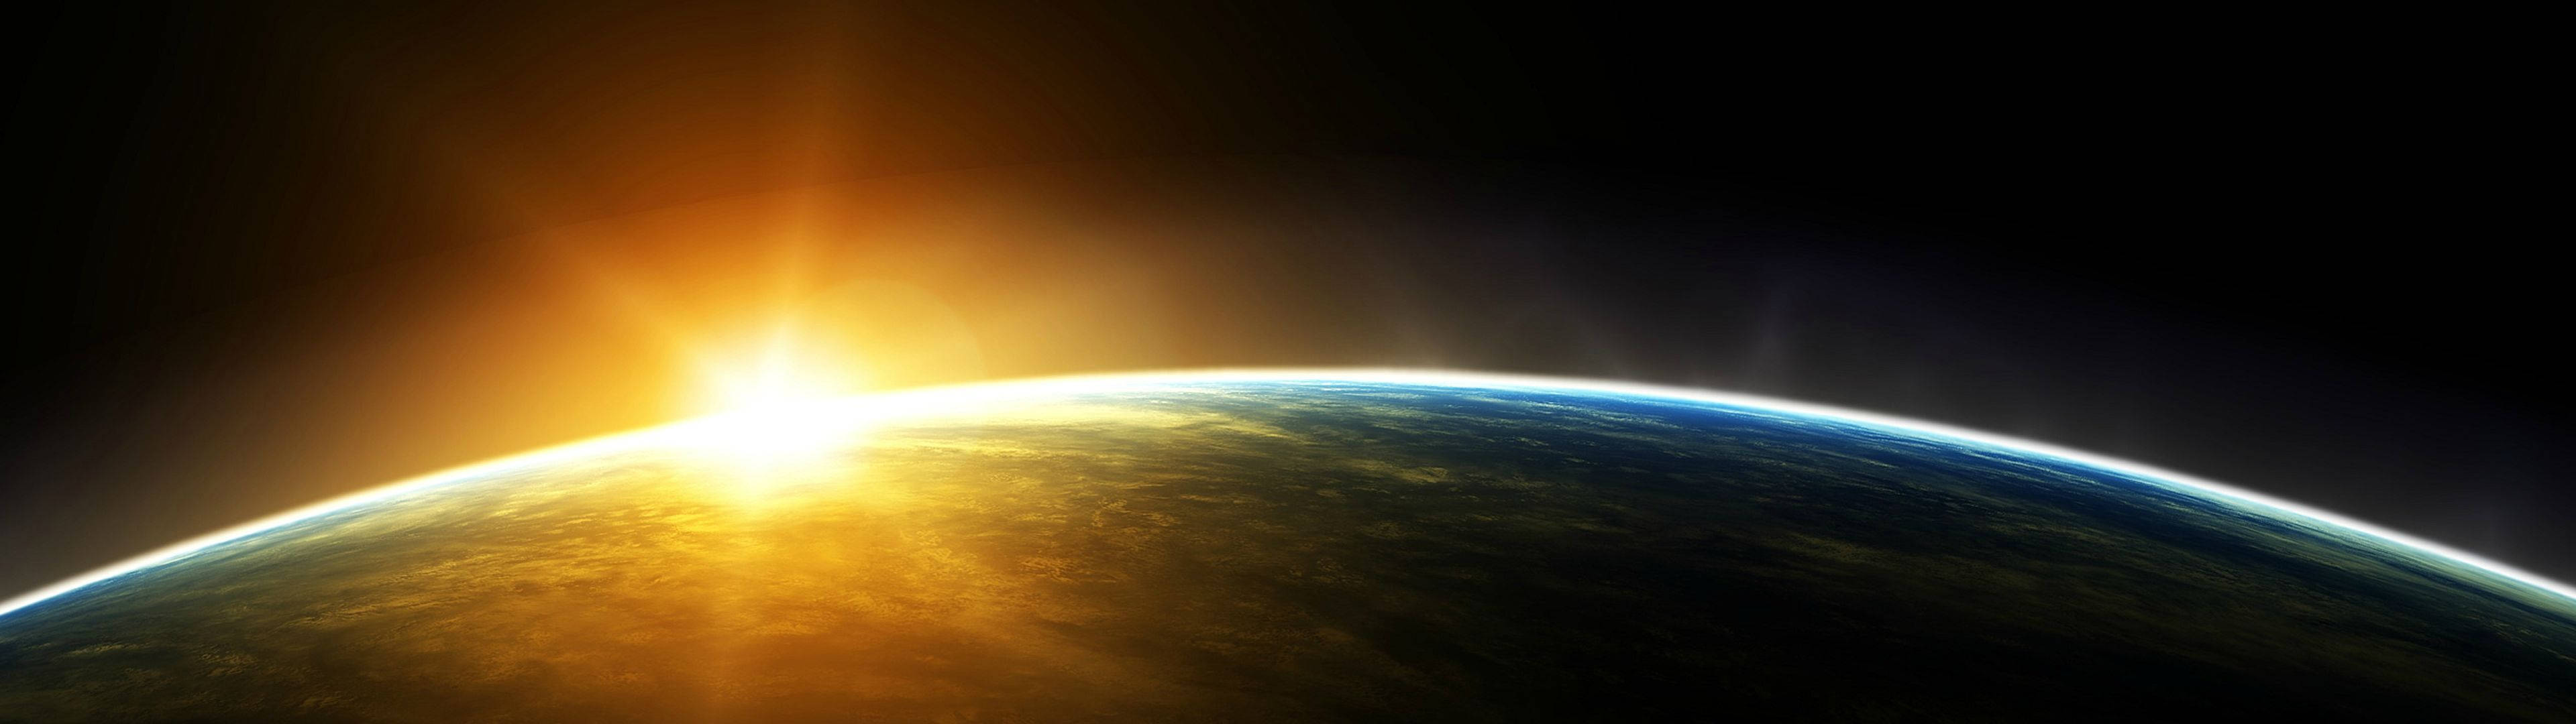 3840x1080 4k Earth Surface Background